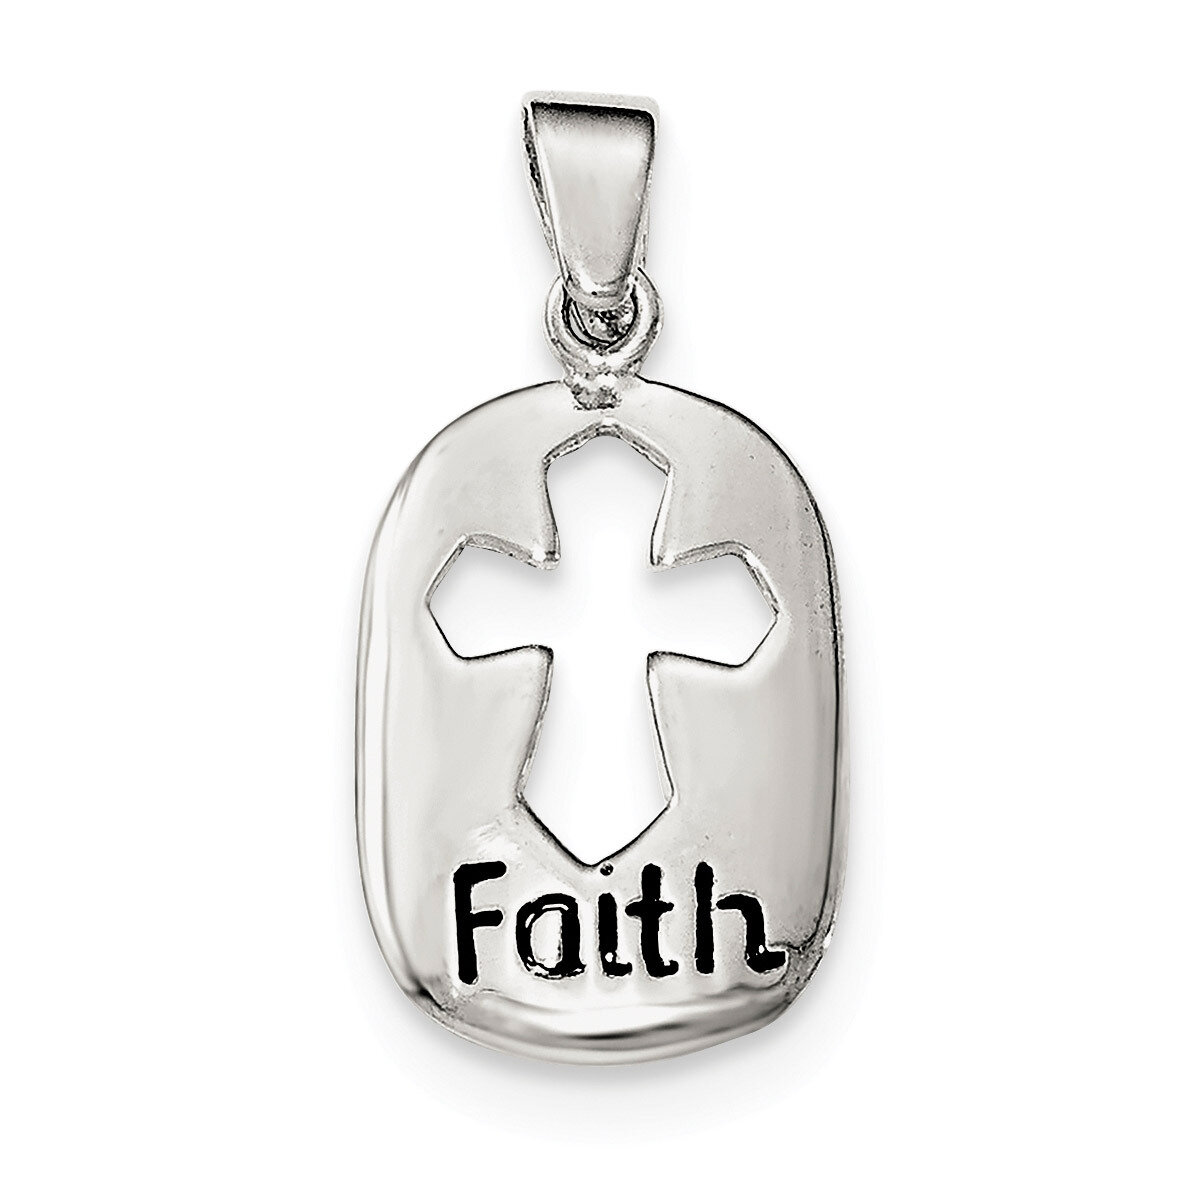 Faith Pendant Sterling Silver Polished QC8444